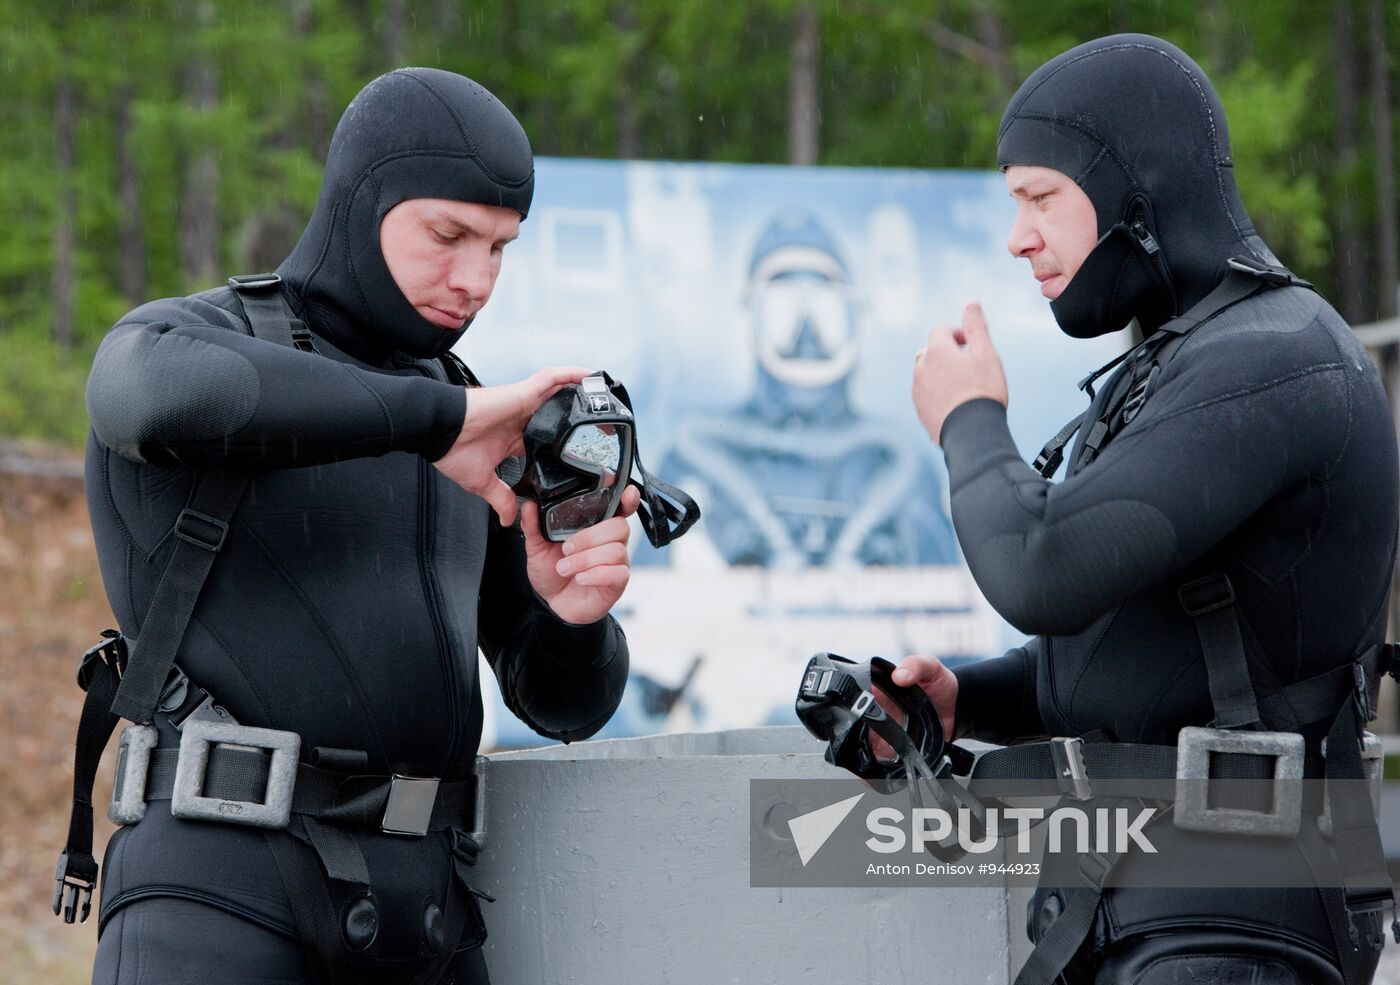 Practice session of divers, explosives experts at Lake Baikal